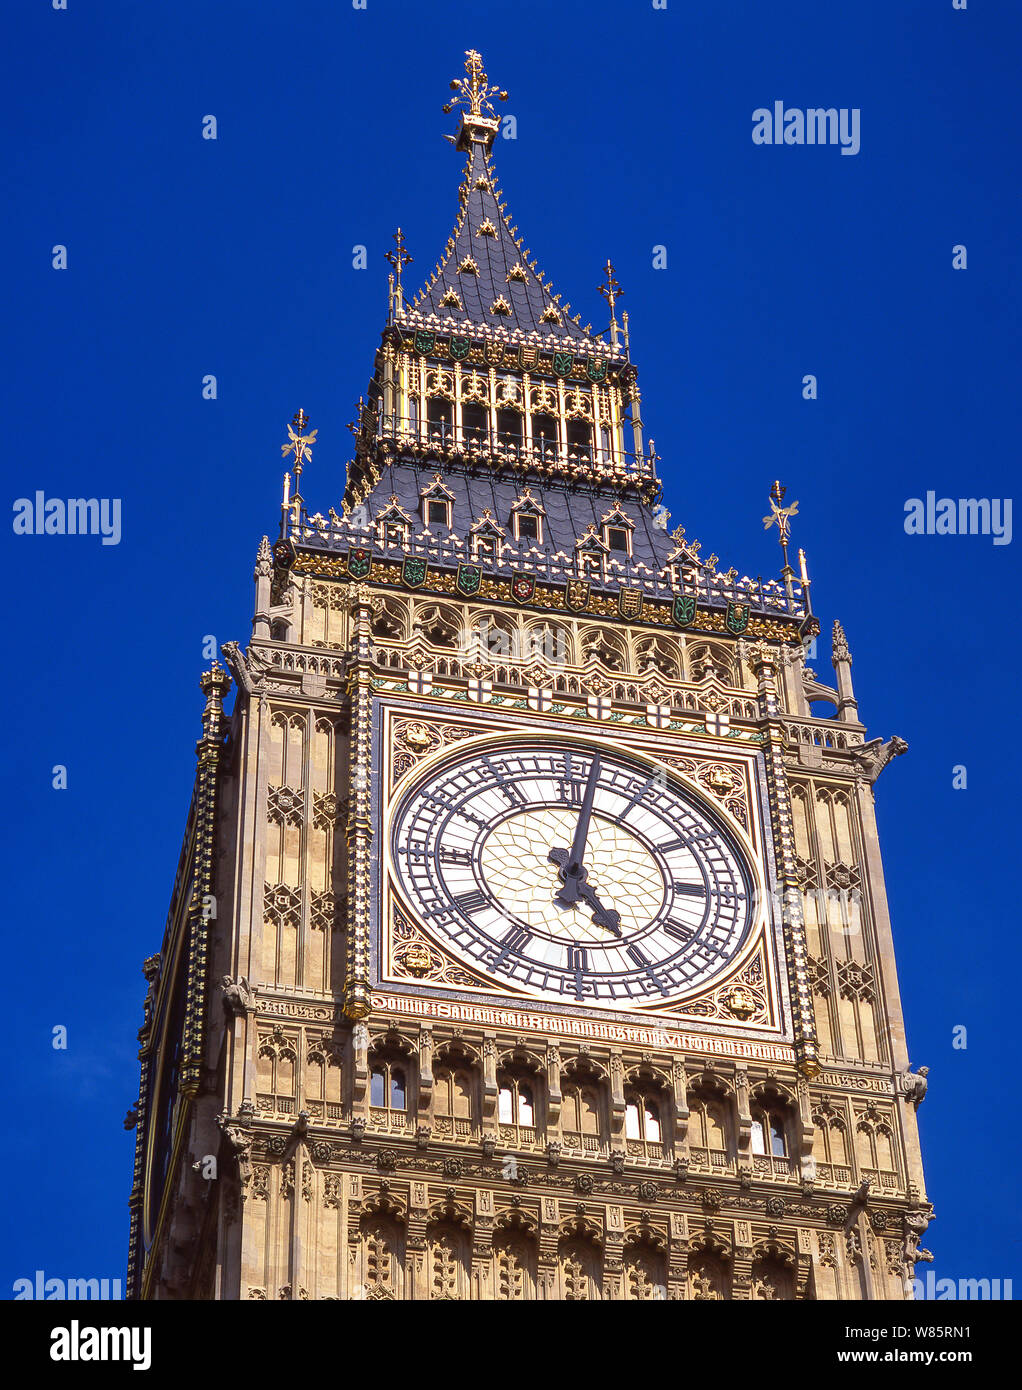 Big Ben and Elizabeth Tower from Westminster Bridge, Palace of Westminster (Parliament), City of Westminster, Greater London, England, United Kingdom Stock Photo